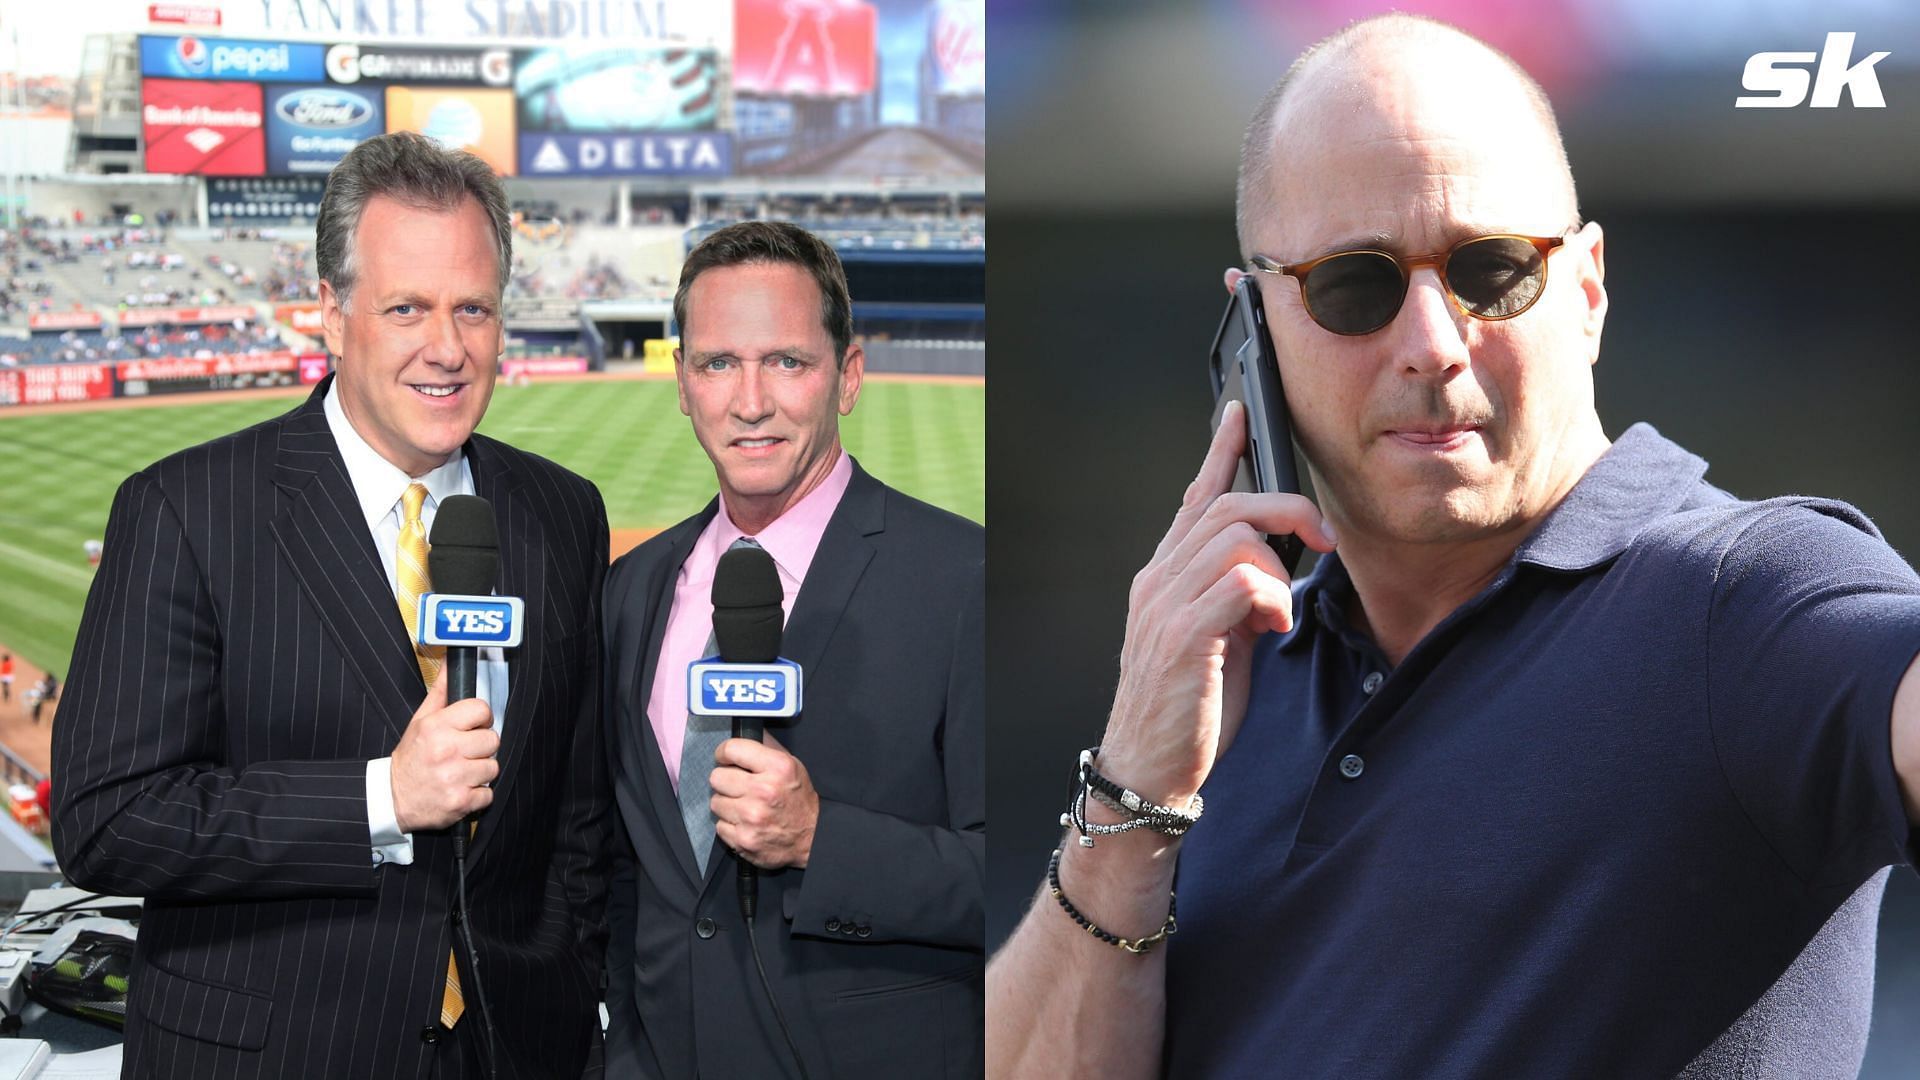 Is Brian Cashman telling the media to lay off him?